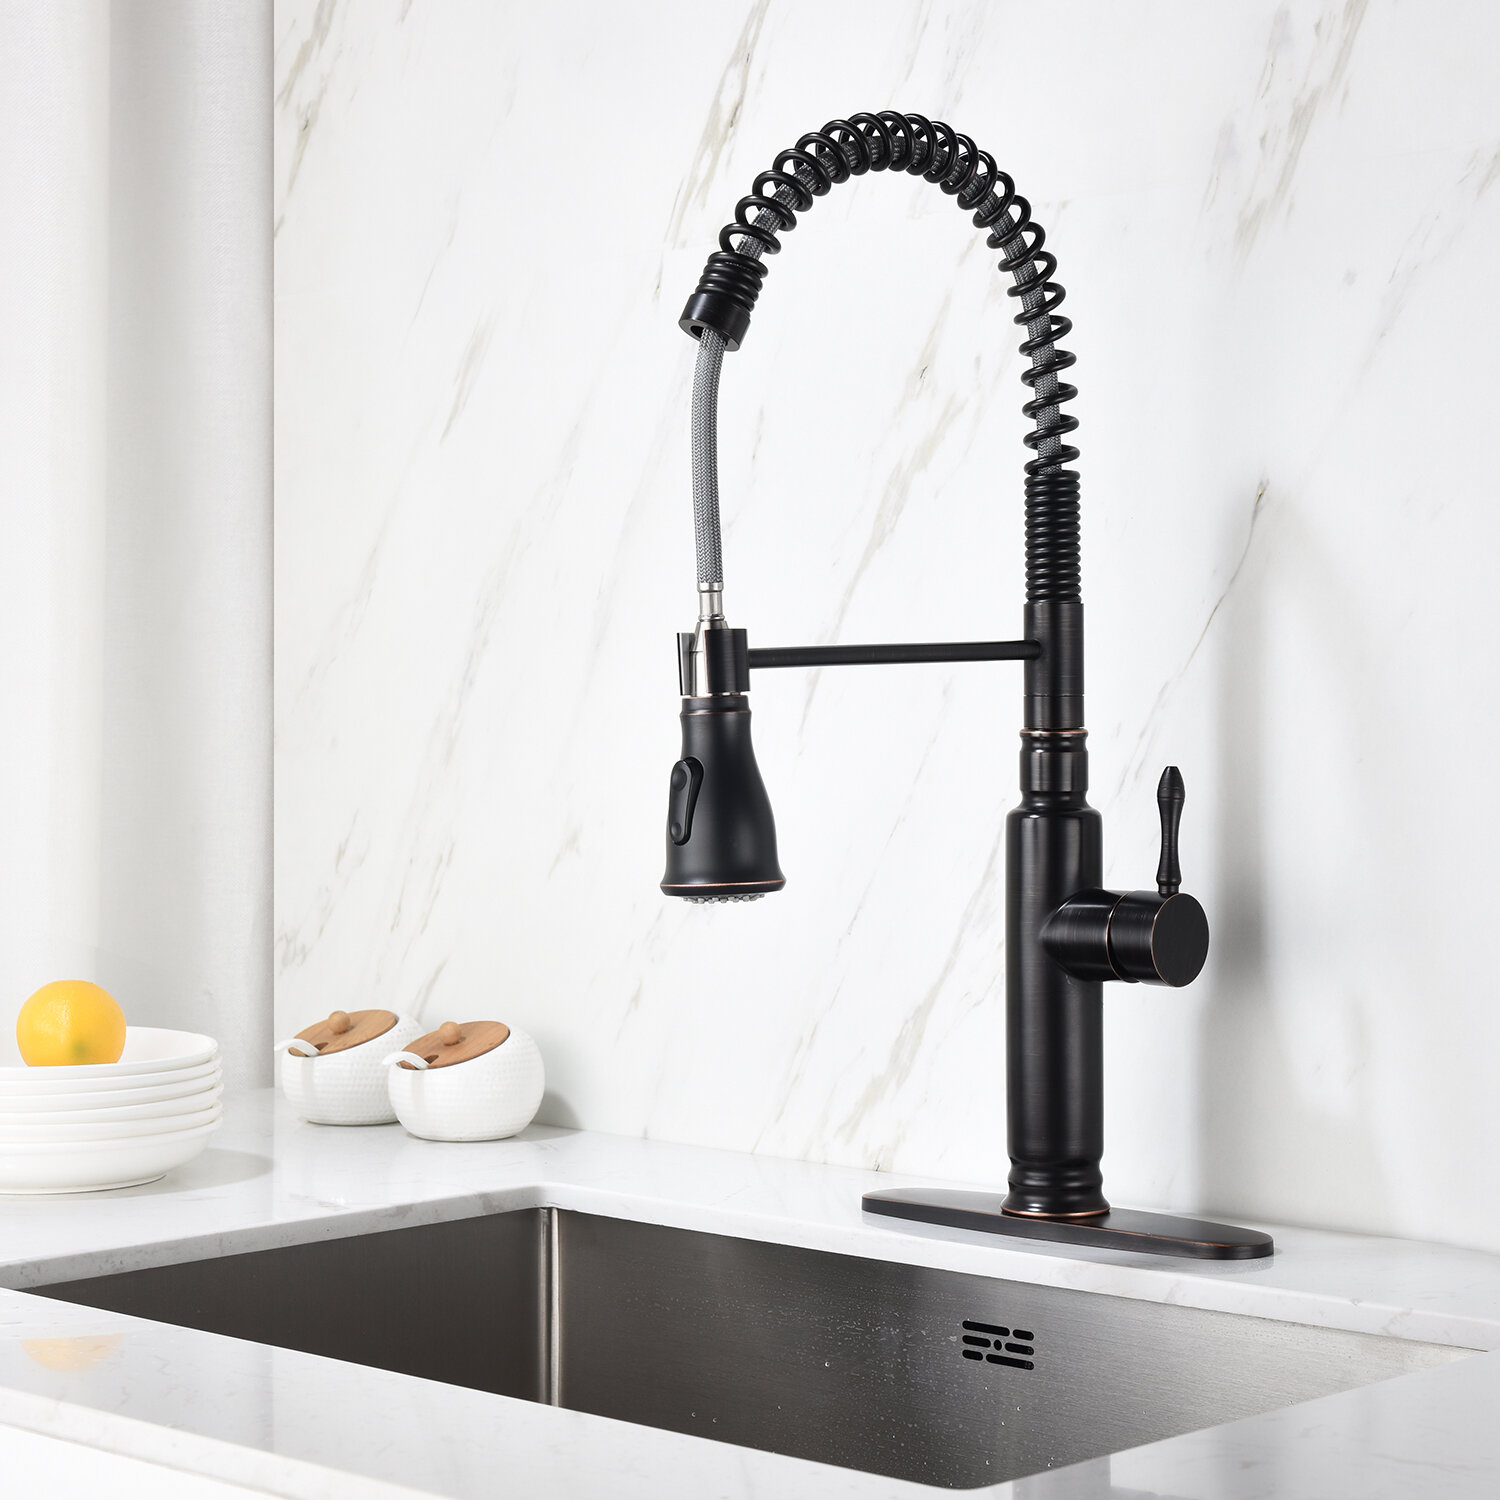 Organnice Stainless Steel Single Lever Handle Pull Down Sprayer Oil Rubbed Bronze Kitchen Faucet